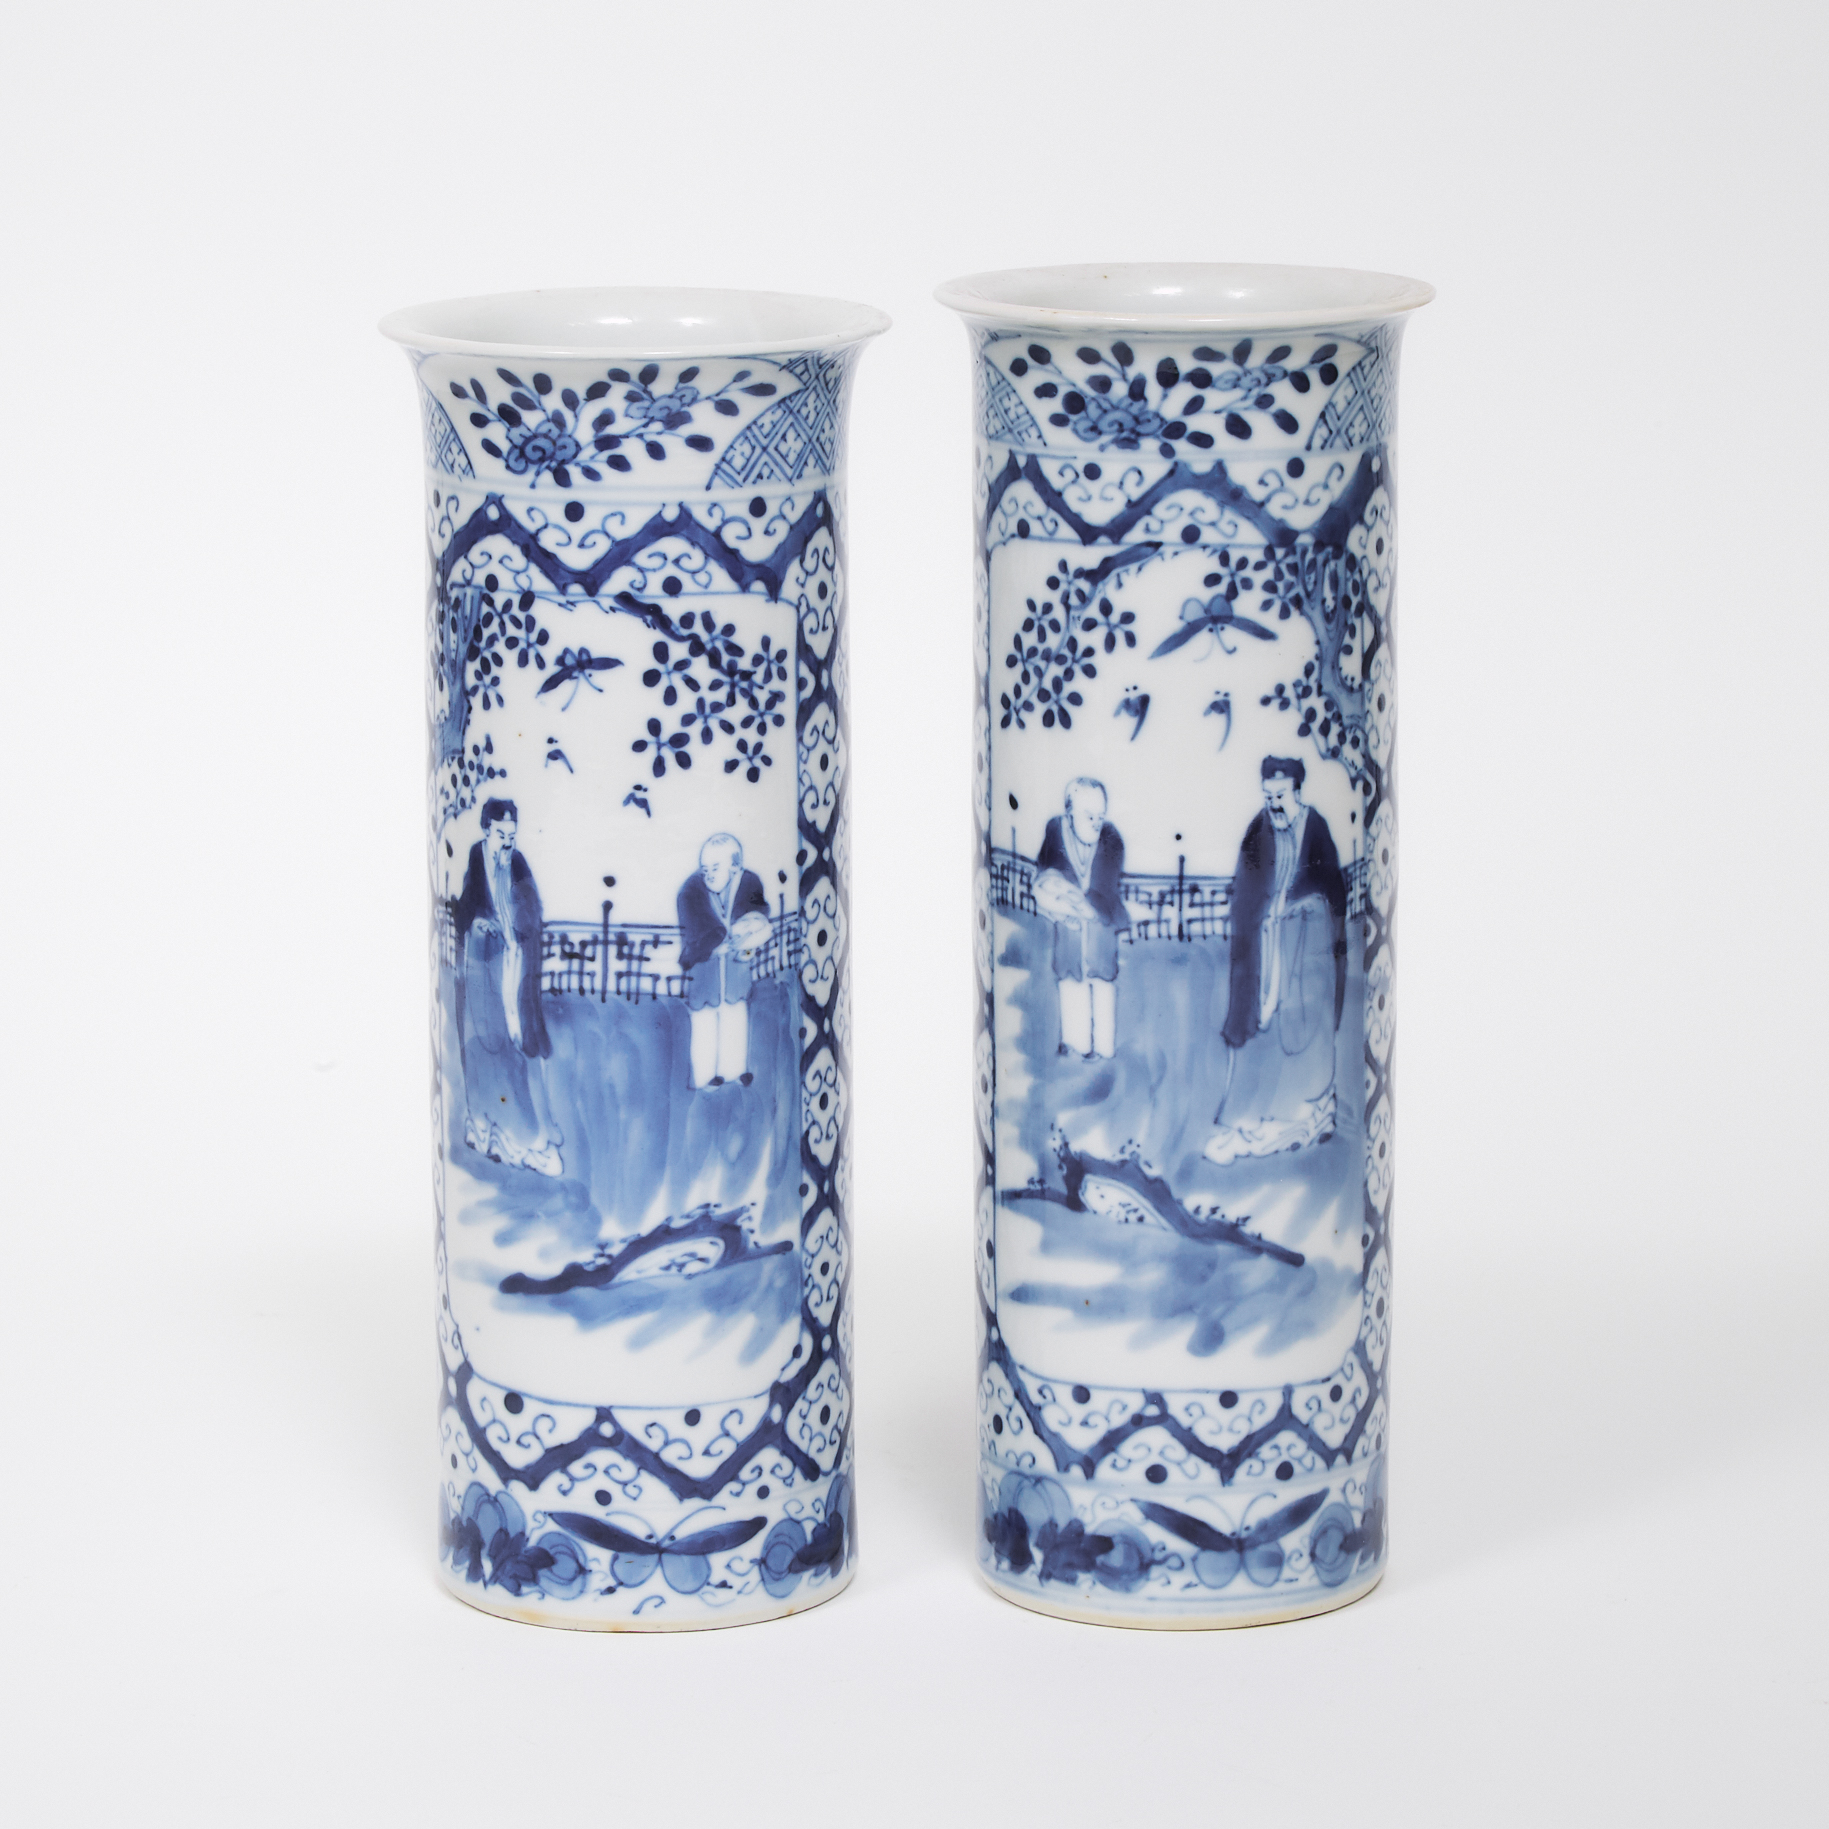 A Pair of Blue and White Sleeve Vases, Late Qing Dynasty